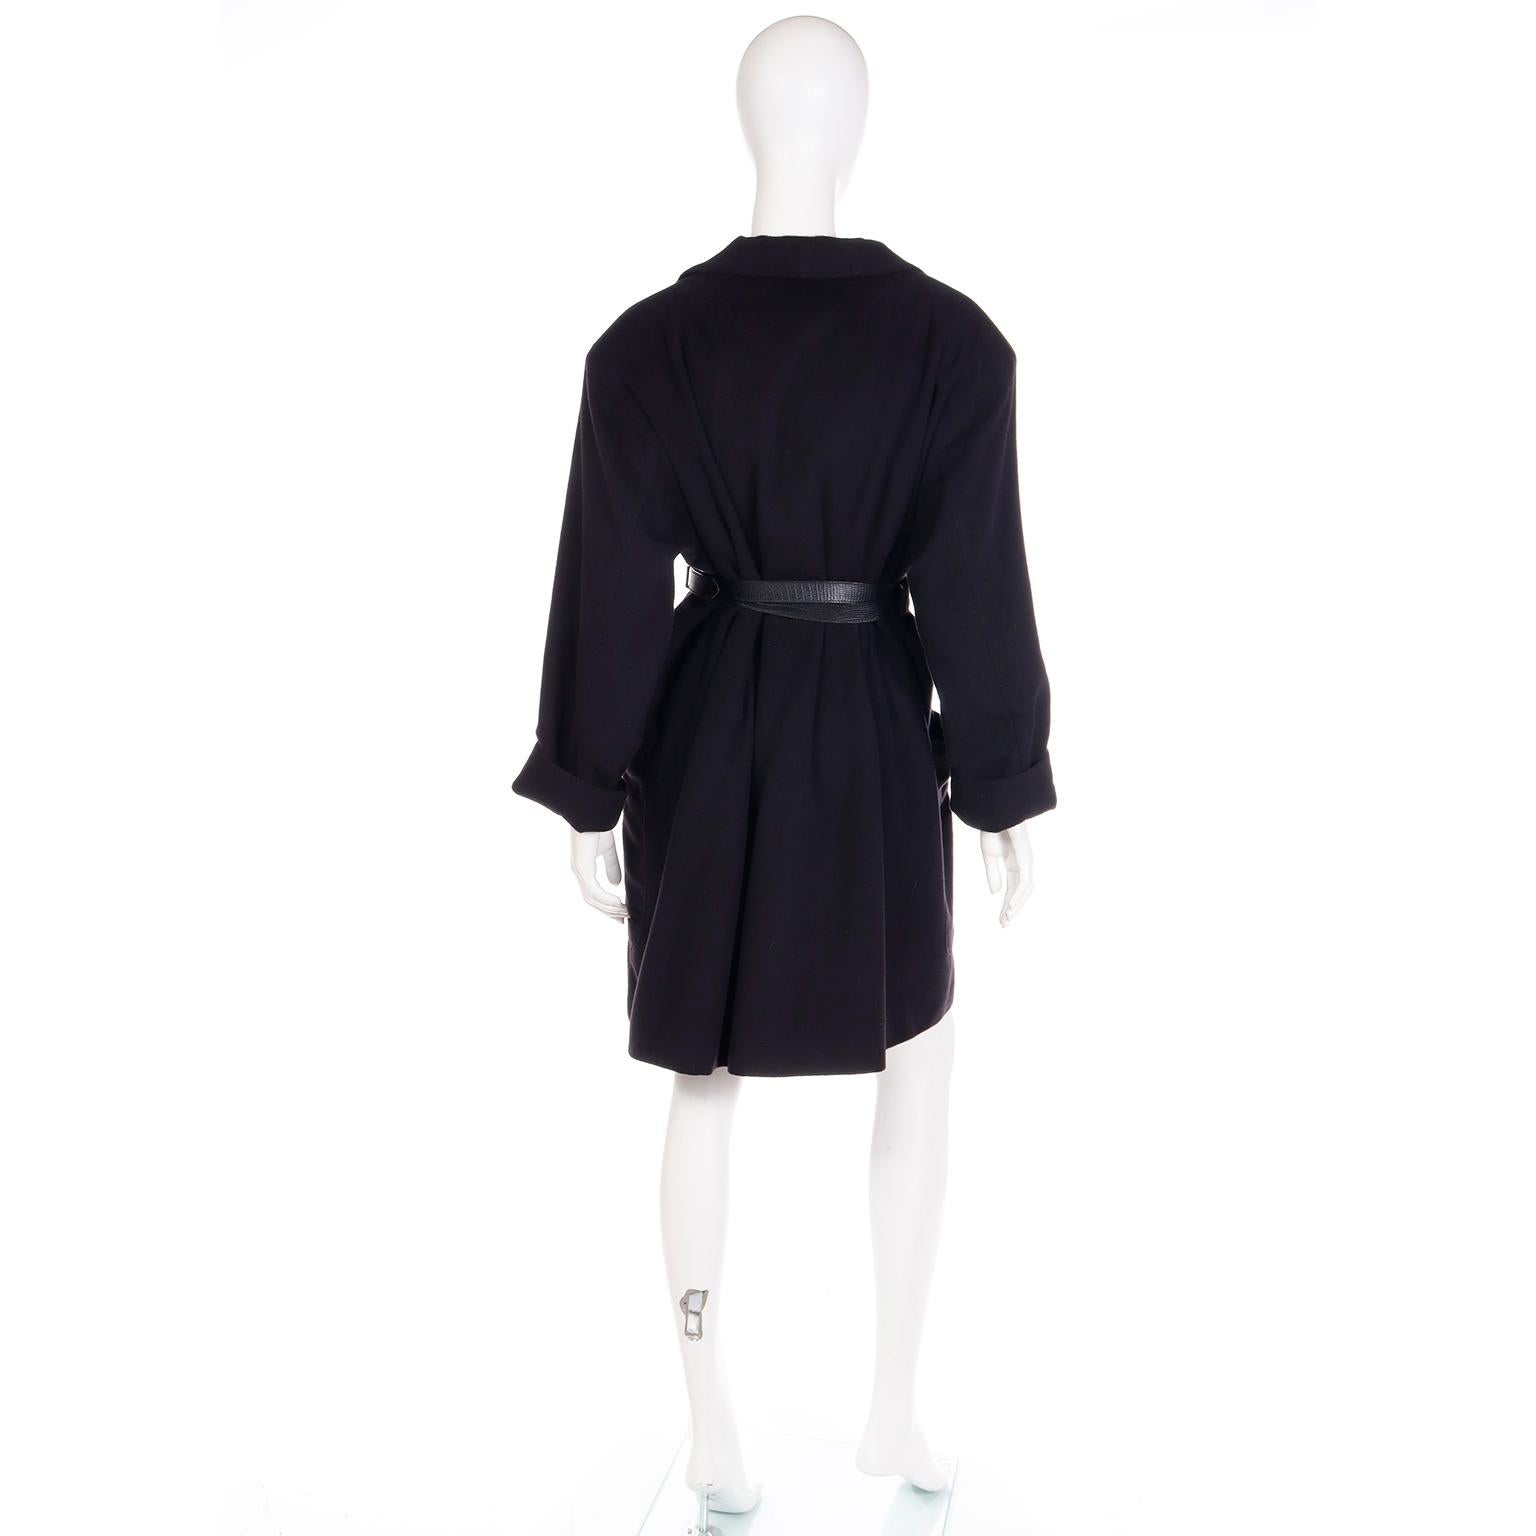 1987 Gianni Versace Vintage Black Wool Coat With Leather Belt 1